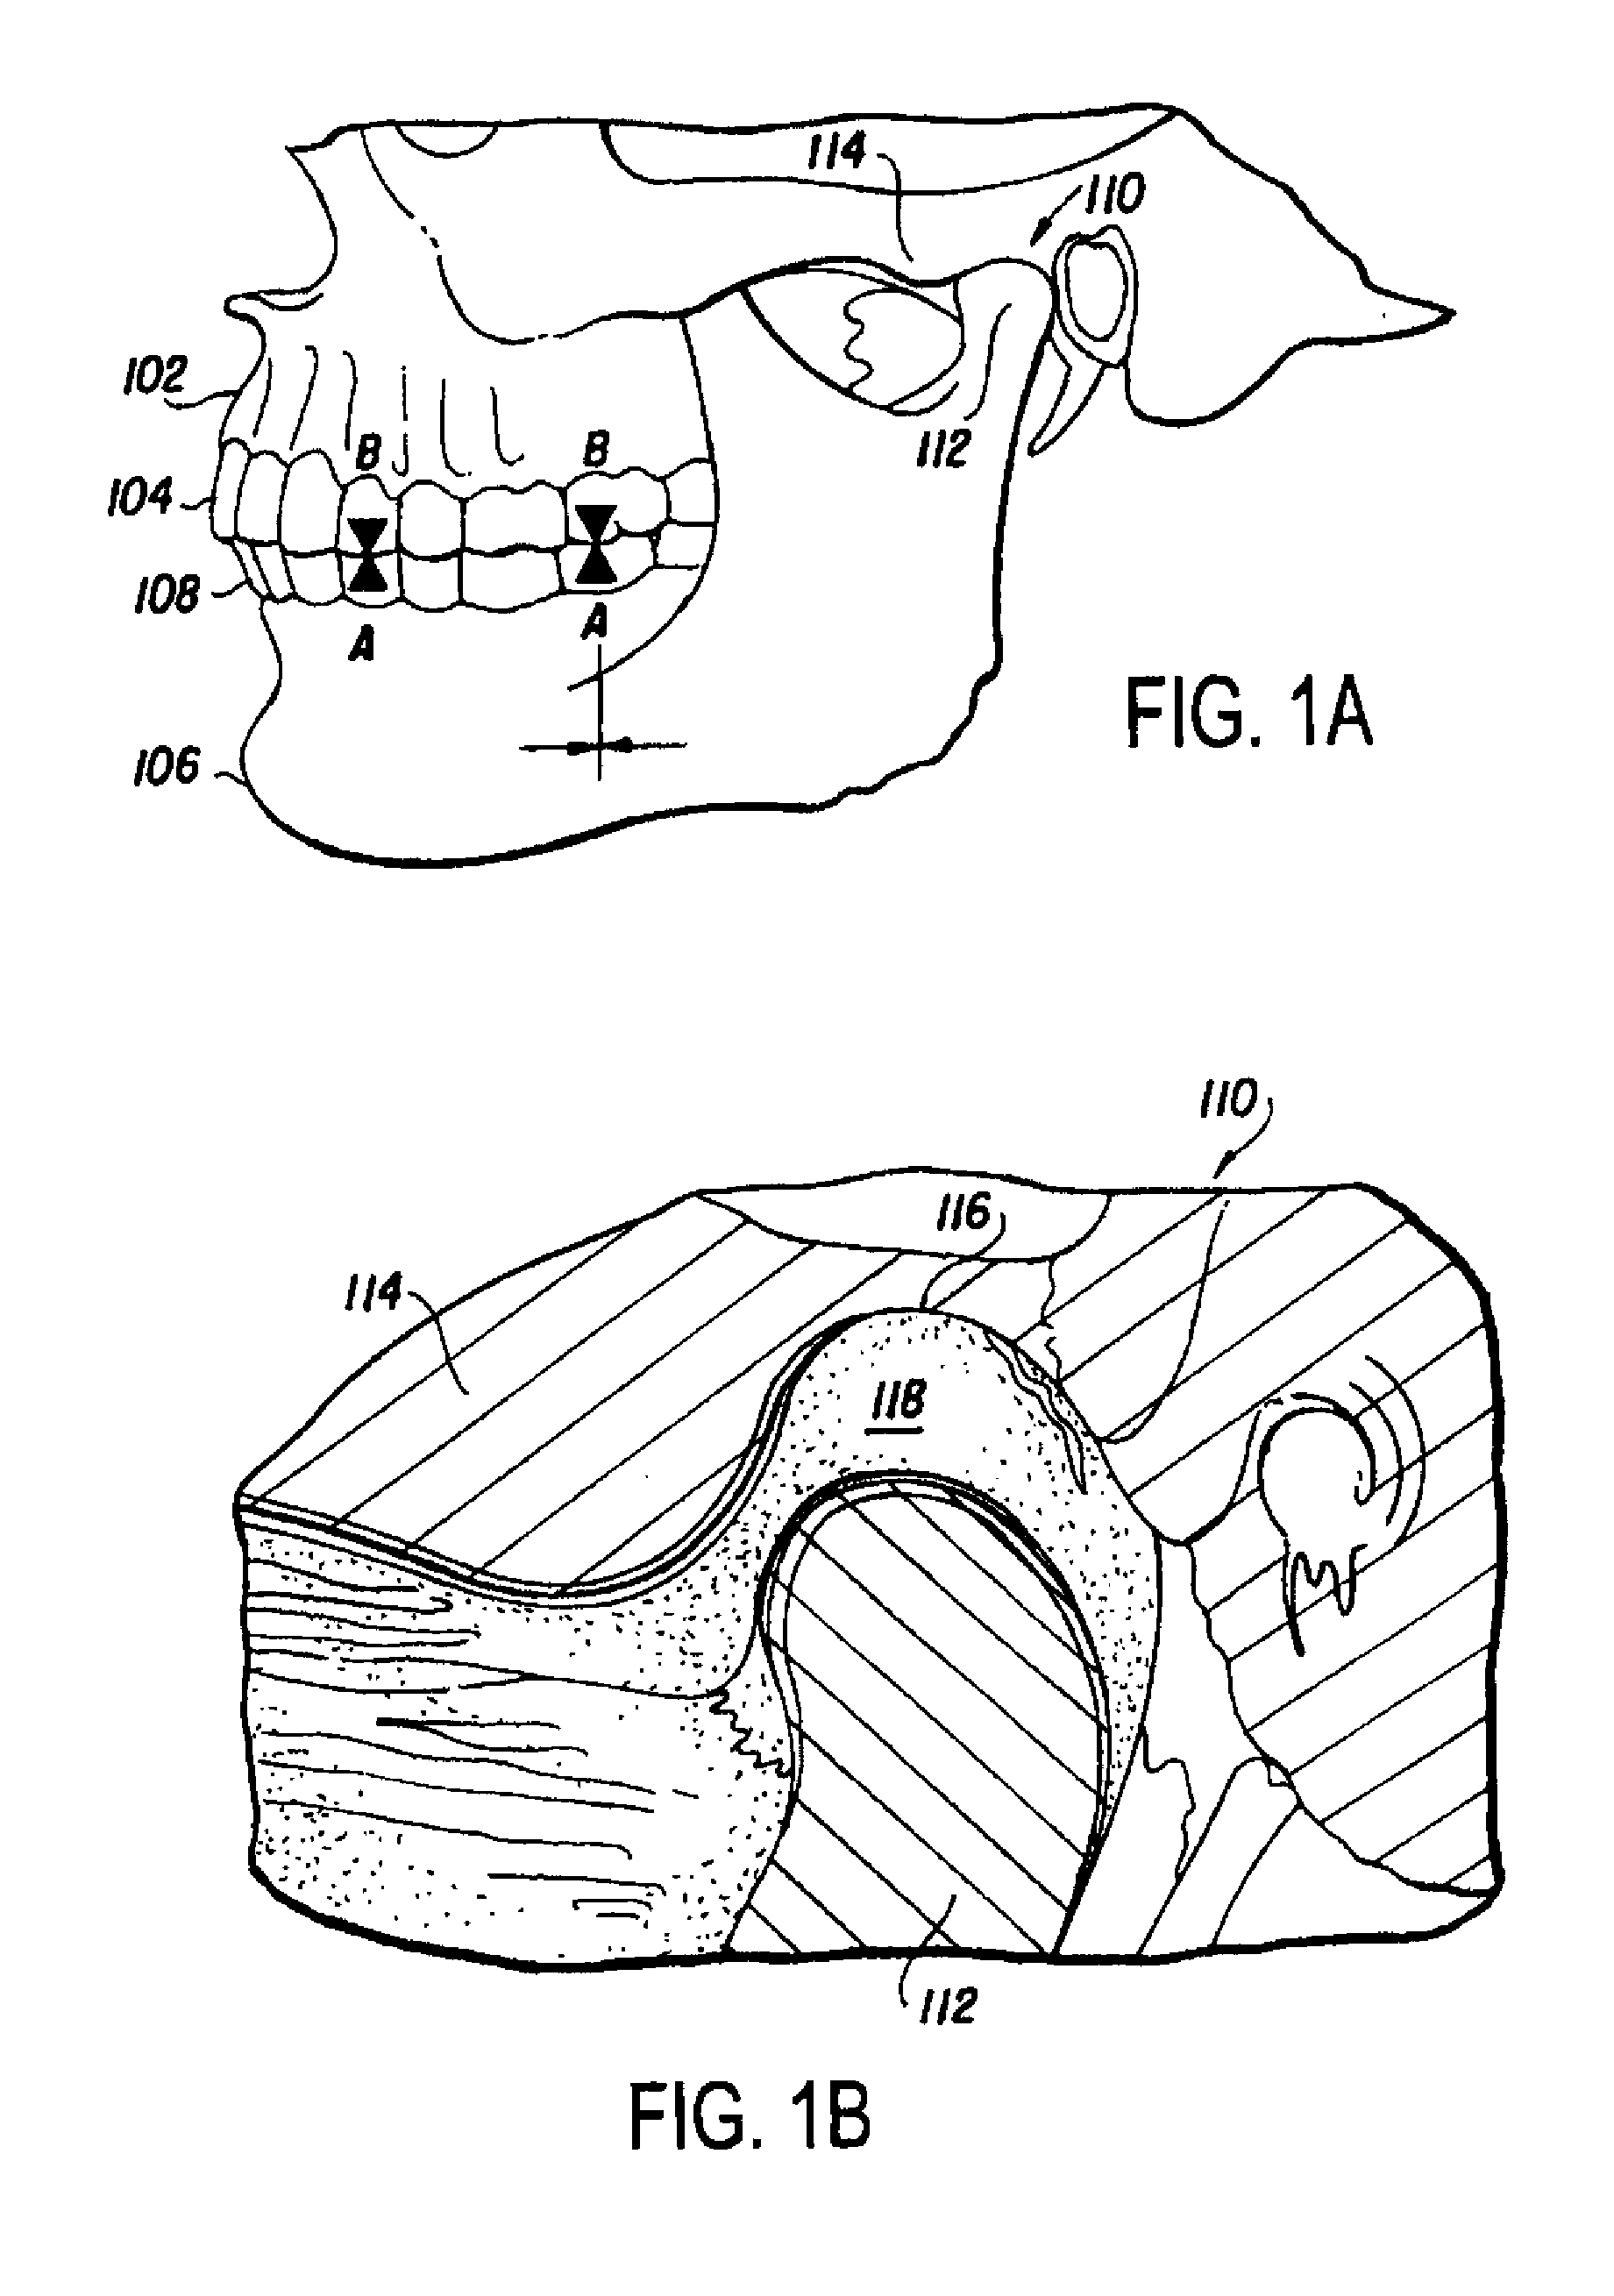 Physical rehabilitation and training aid: method of using musculoskeletal repositioning device